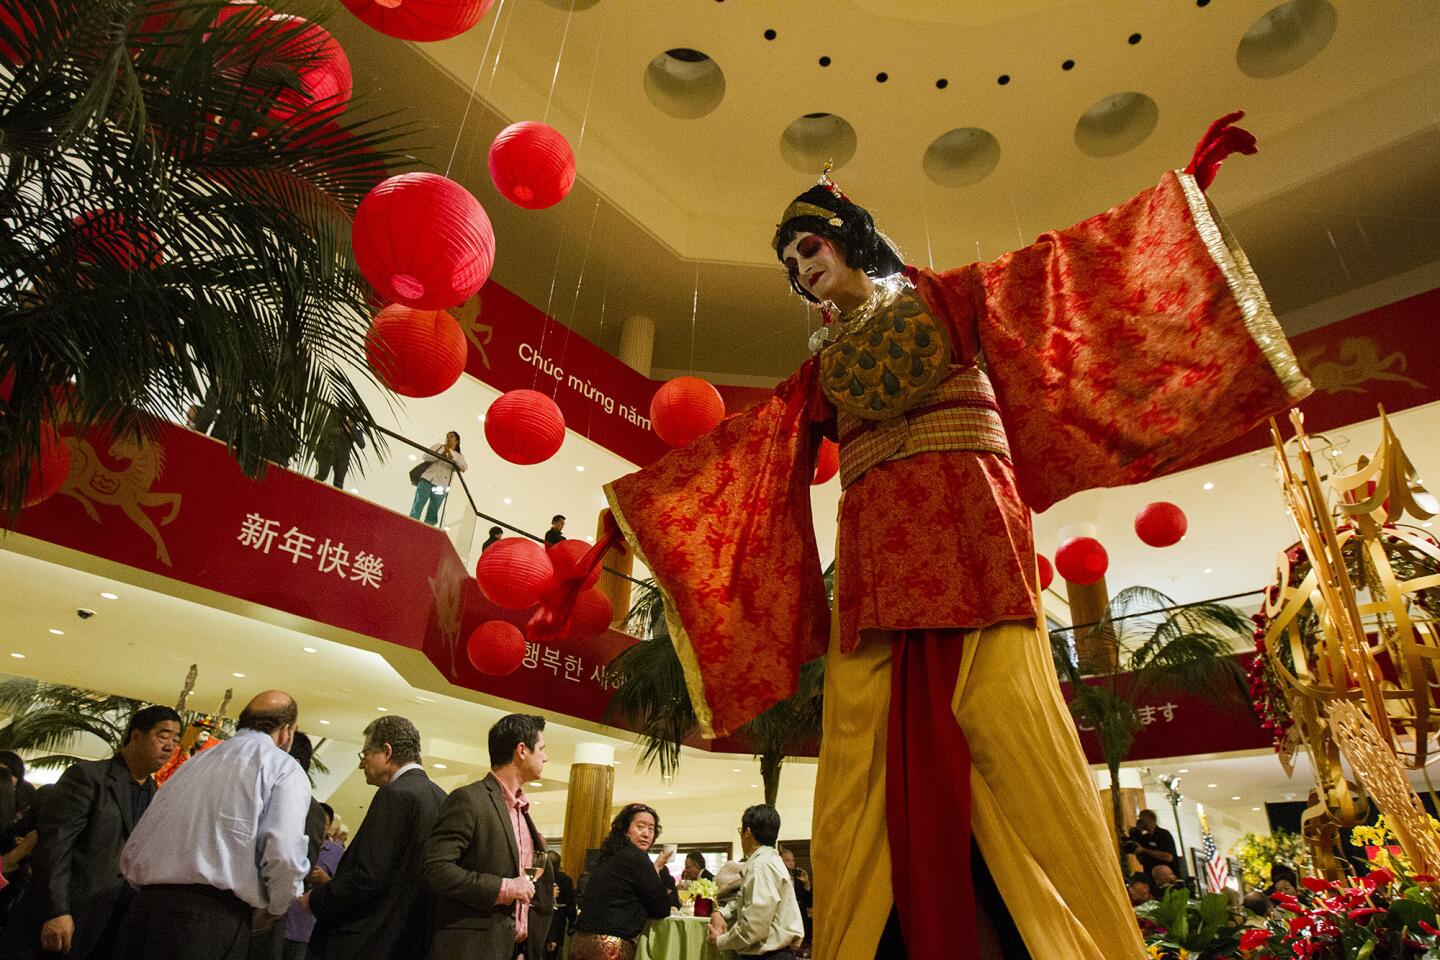 Seraphina Whitman with Stilt Circus entertains the crowd during the South Coast Plaza's celebration of the Year of the Horse during the opening ceremony of a three week Lunar New Year celebration on Thursday.